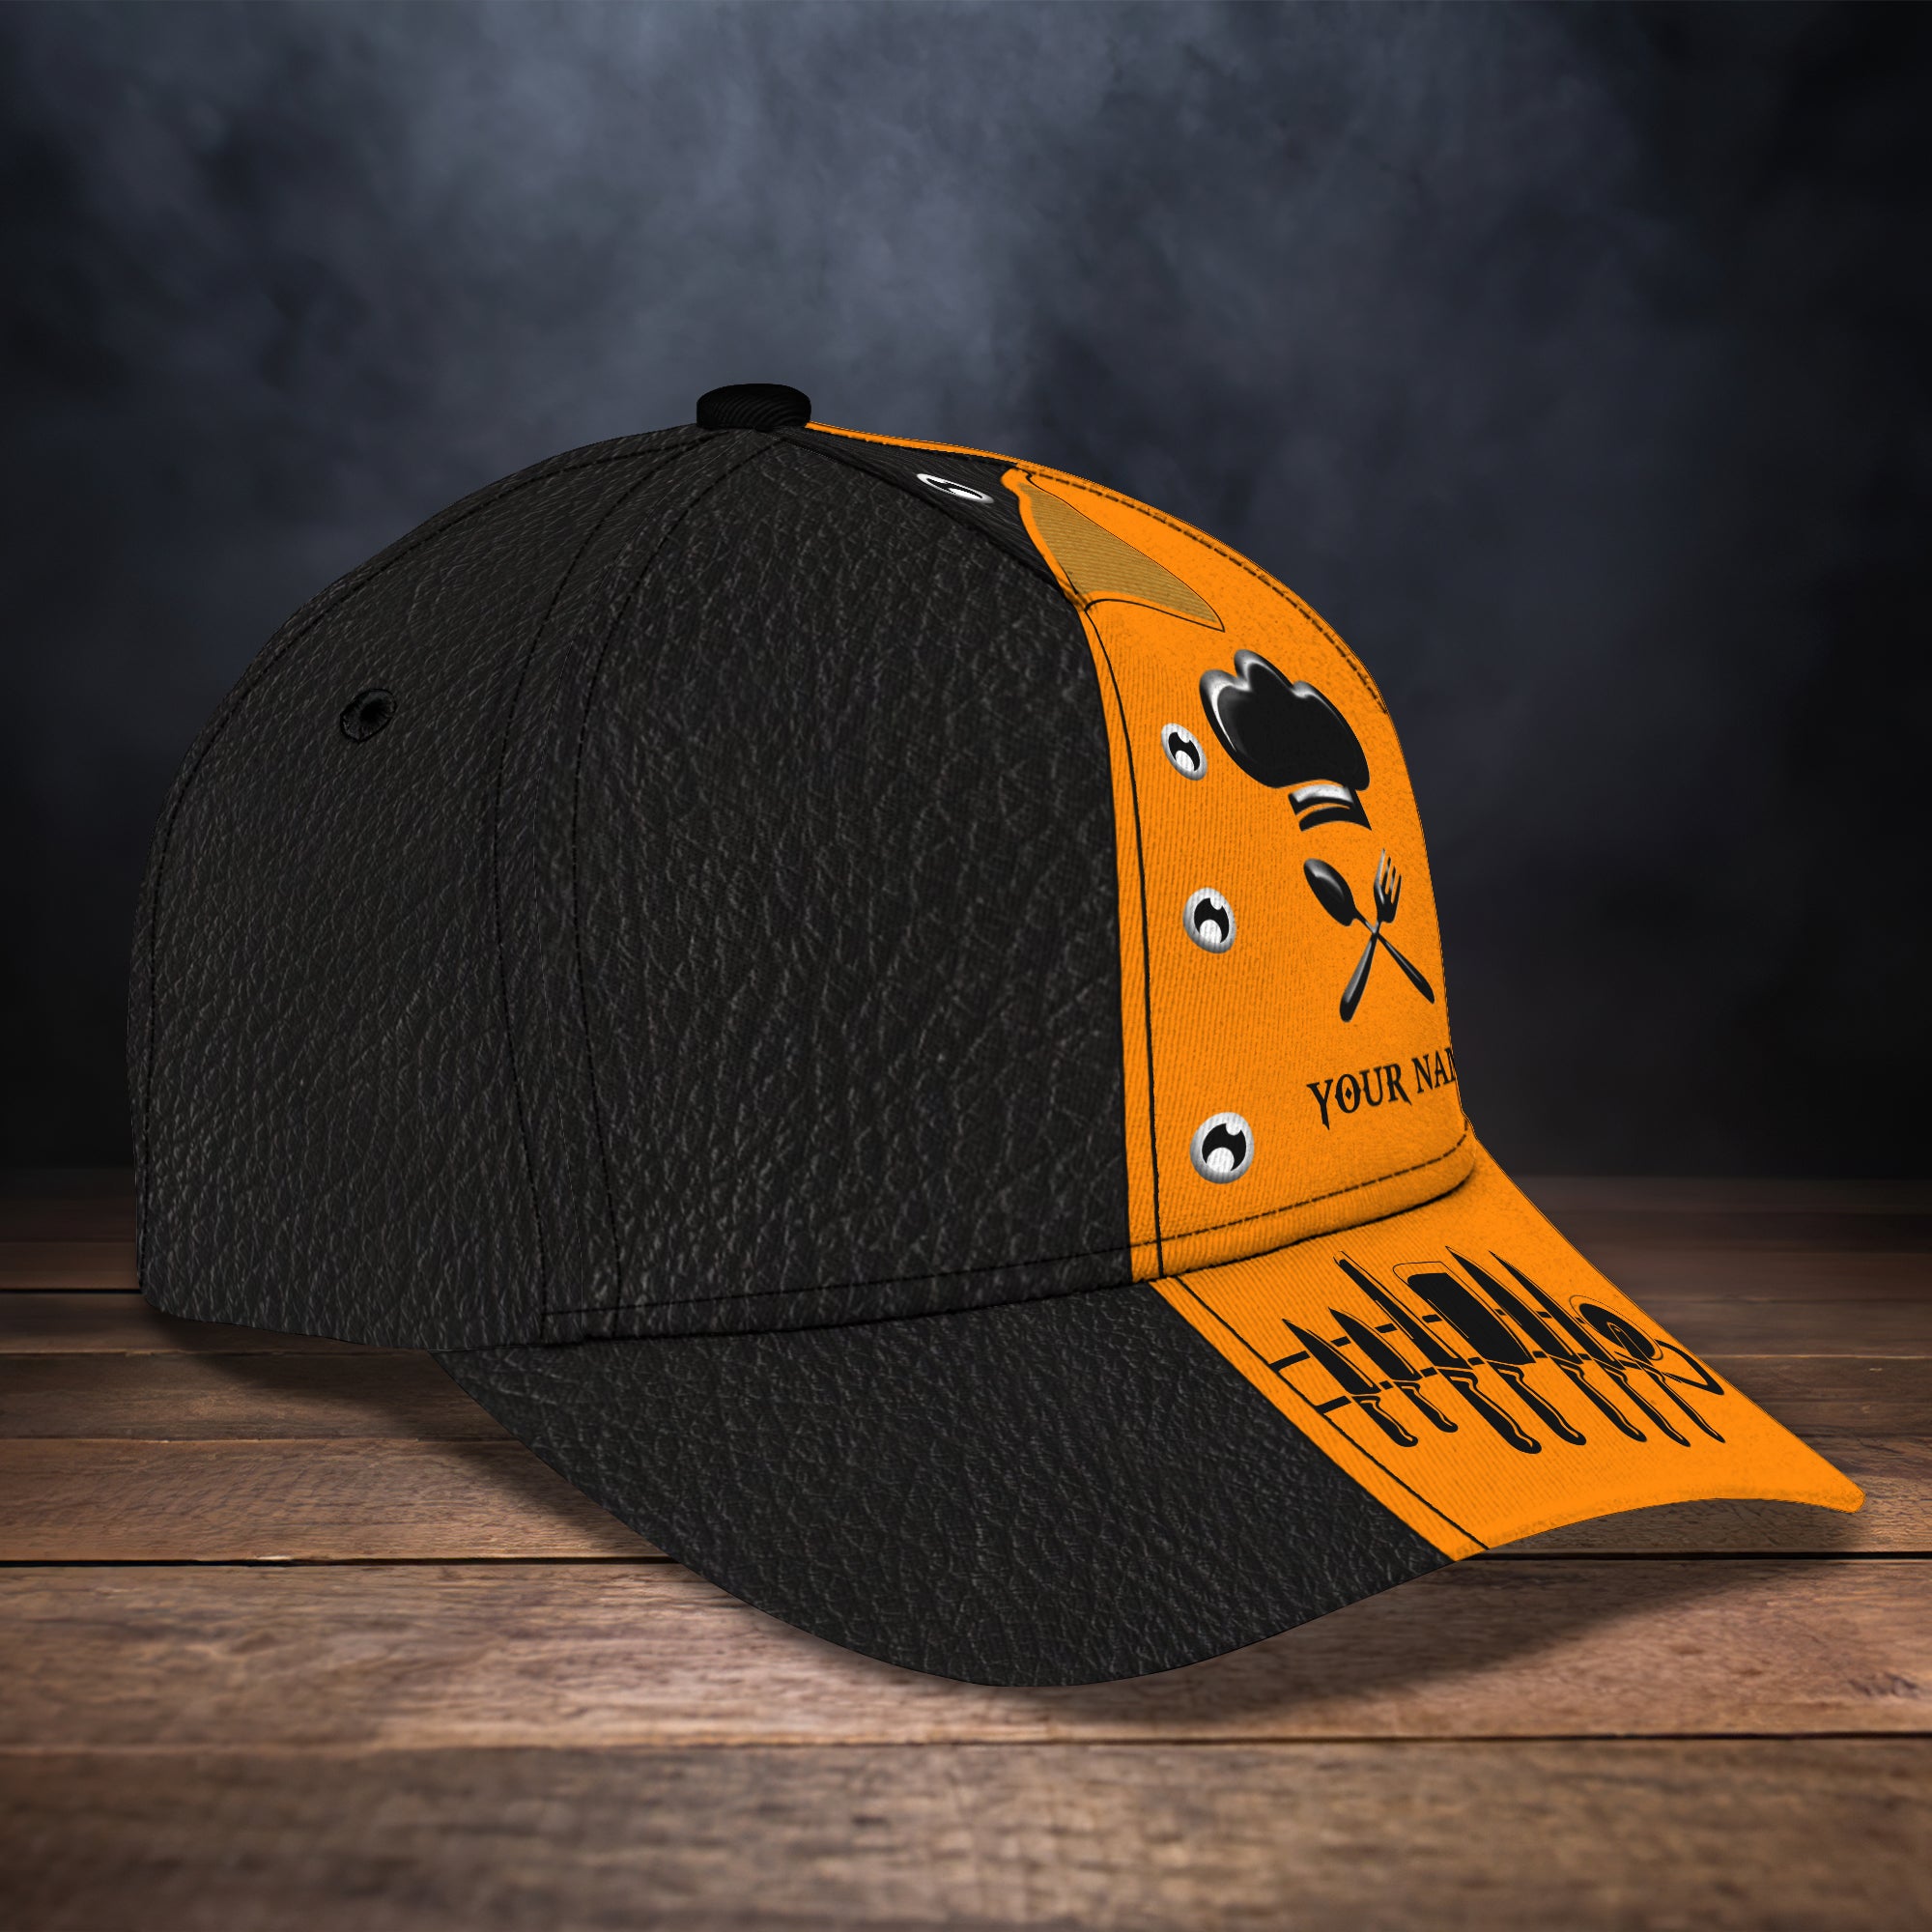 CV98 - Personalized Name Cap - Chef 04